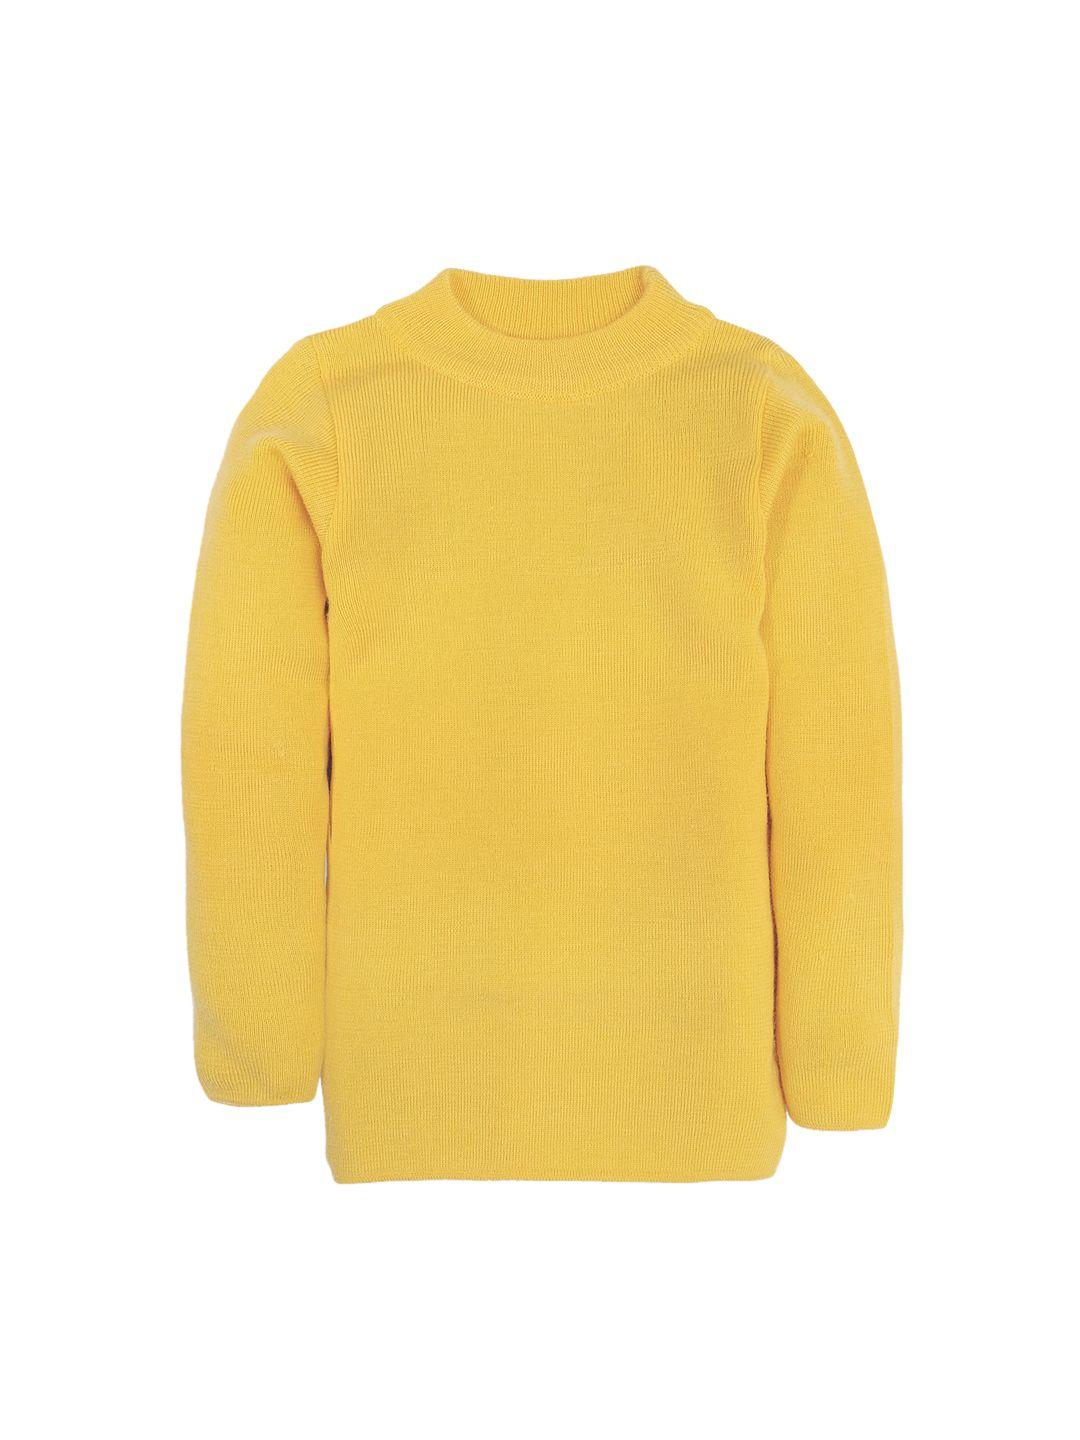 rvk kids yellow solid pullover skivvy sweater